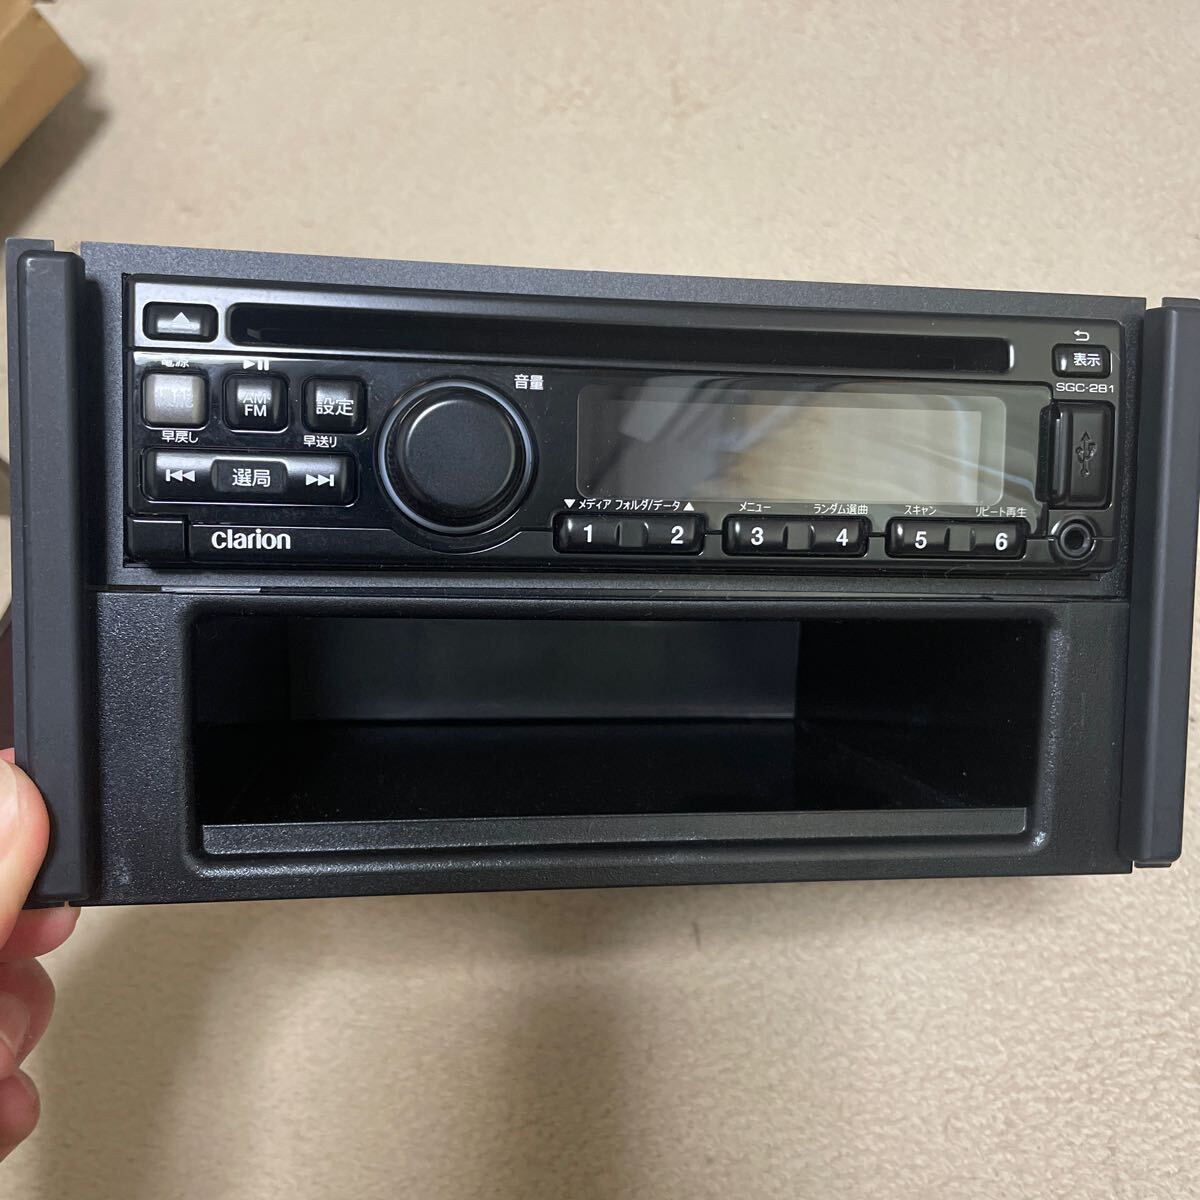  new goods removed car radio 99000-79bp9 Clarion clarion